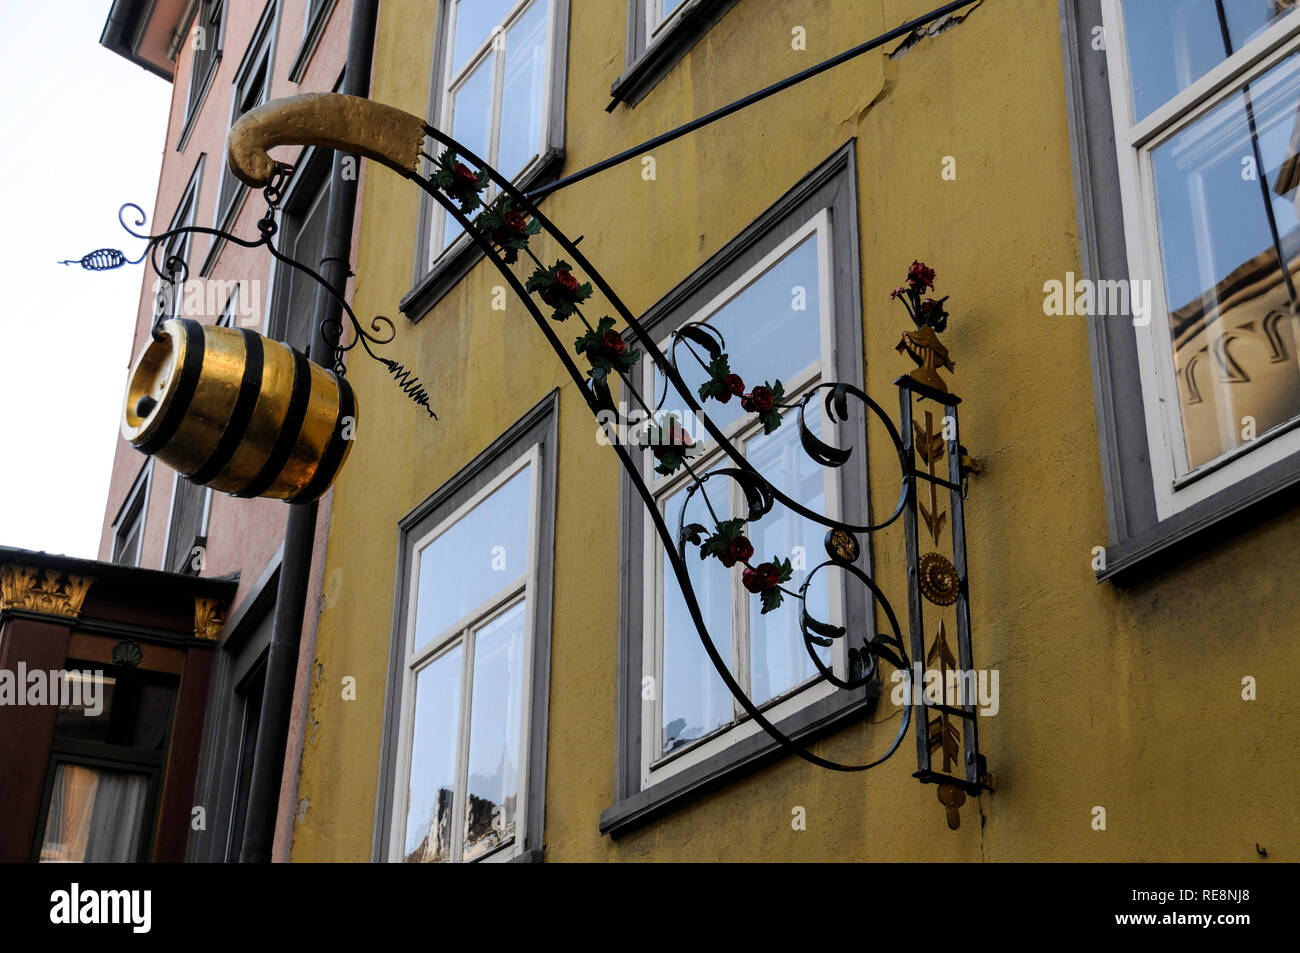 A goldsmith's shop sign with a metal beer barrel in the old quarter of St. Gallen in northeastern Switzerland. Stock Photo